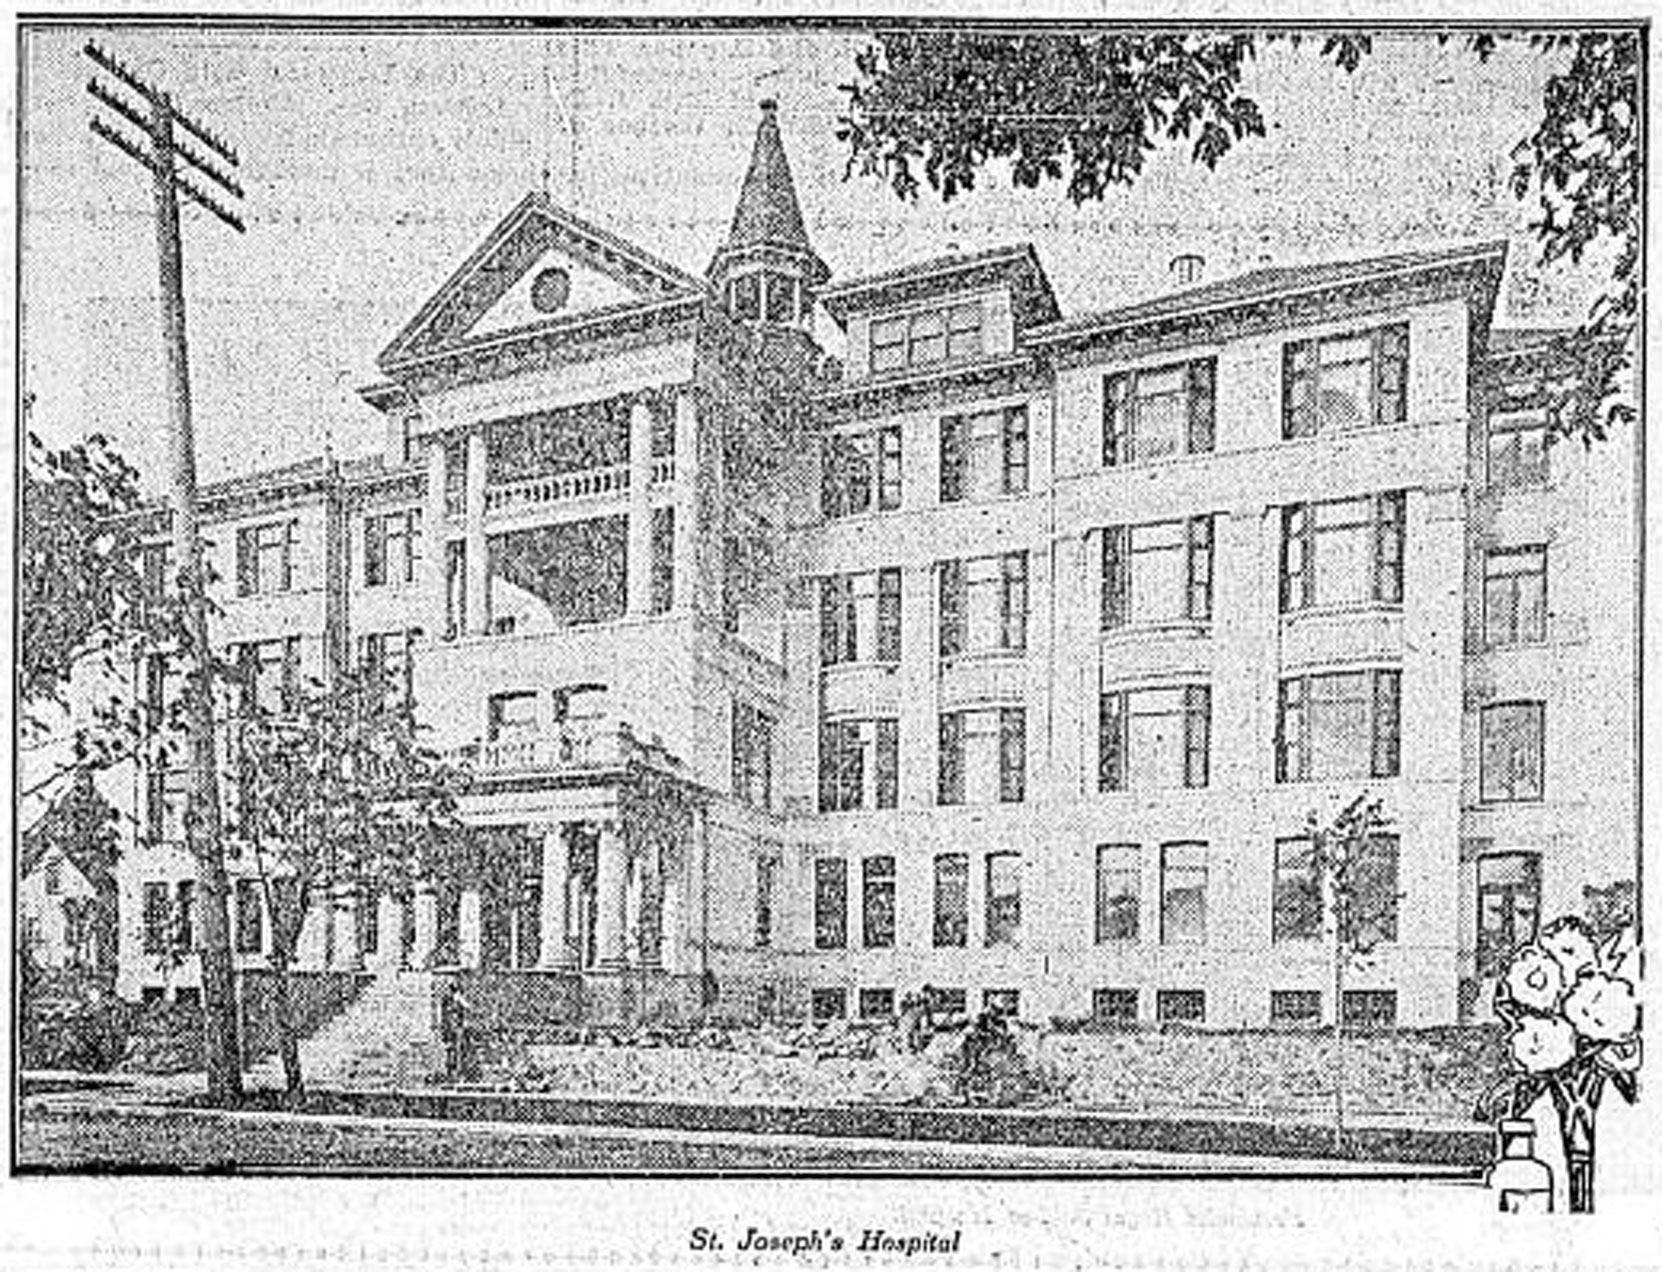 1908 newspaper photograph of St. Joseph's Hospital, 840 Humboldt Street. (Victoria Online Sightseeing Tours collection)